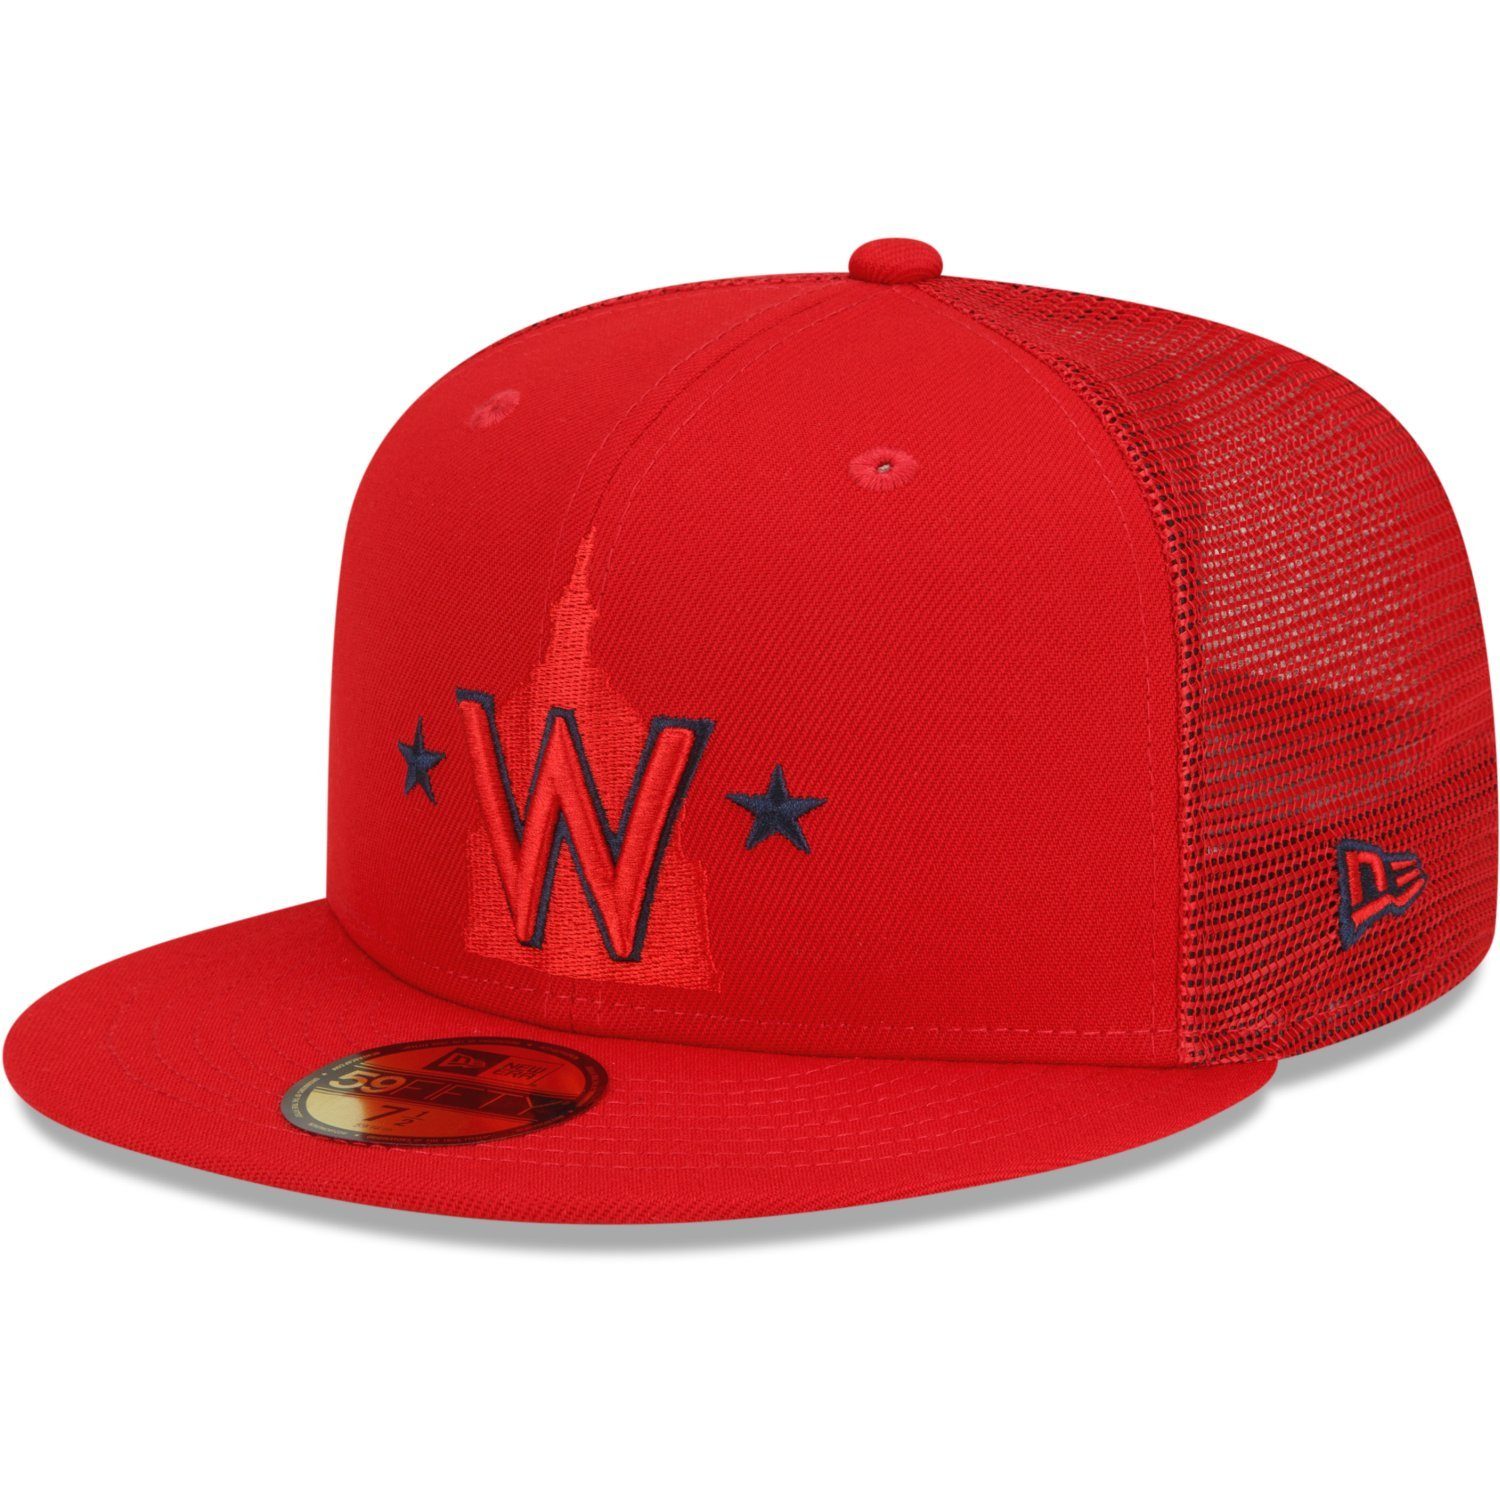 New Era Fitted Cap 59Fifty BATTING Nationals Washington PRACTICE